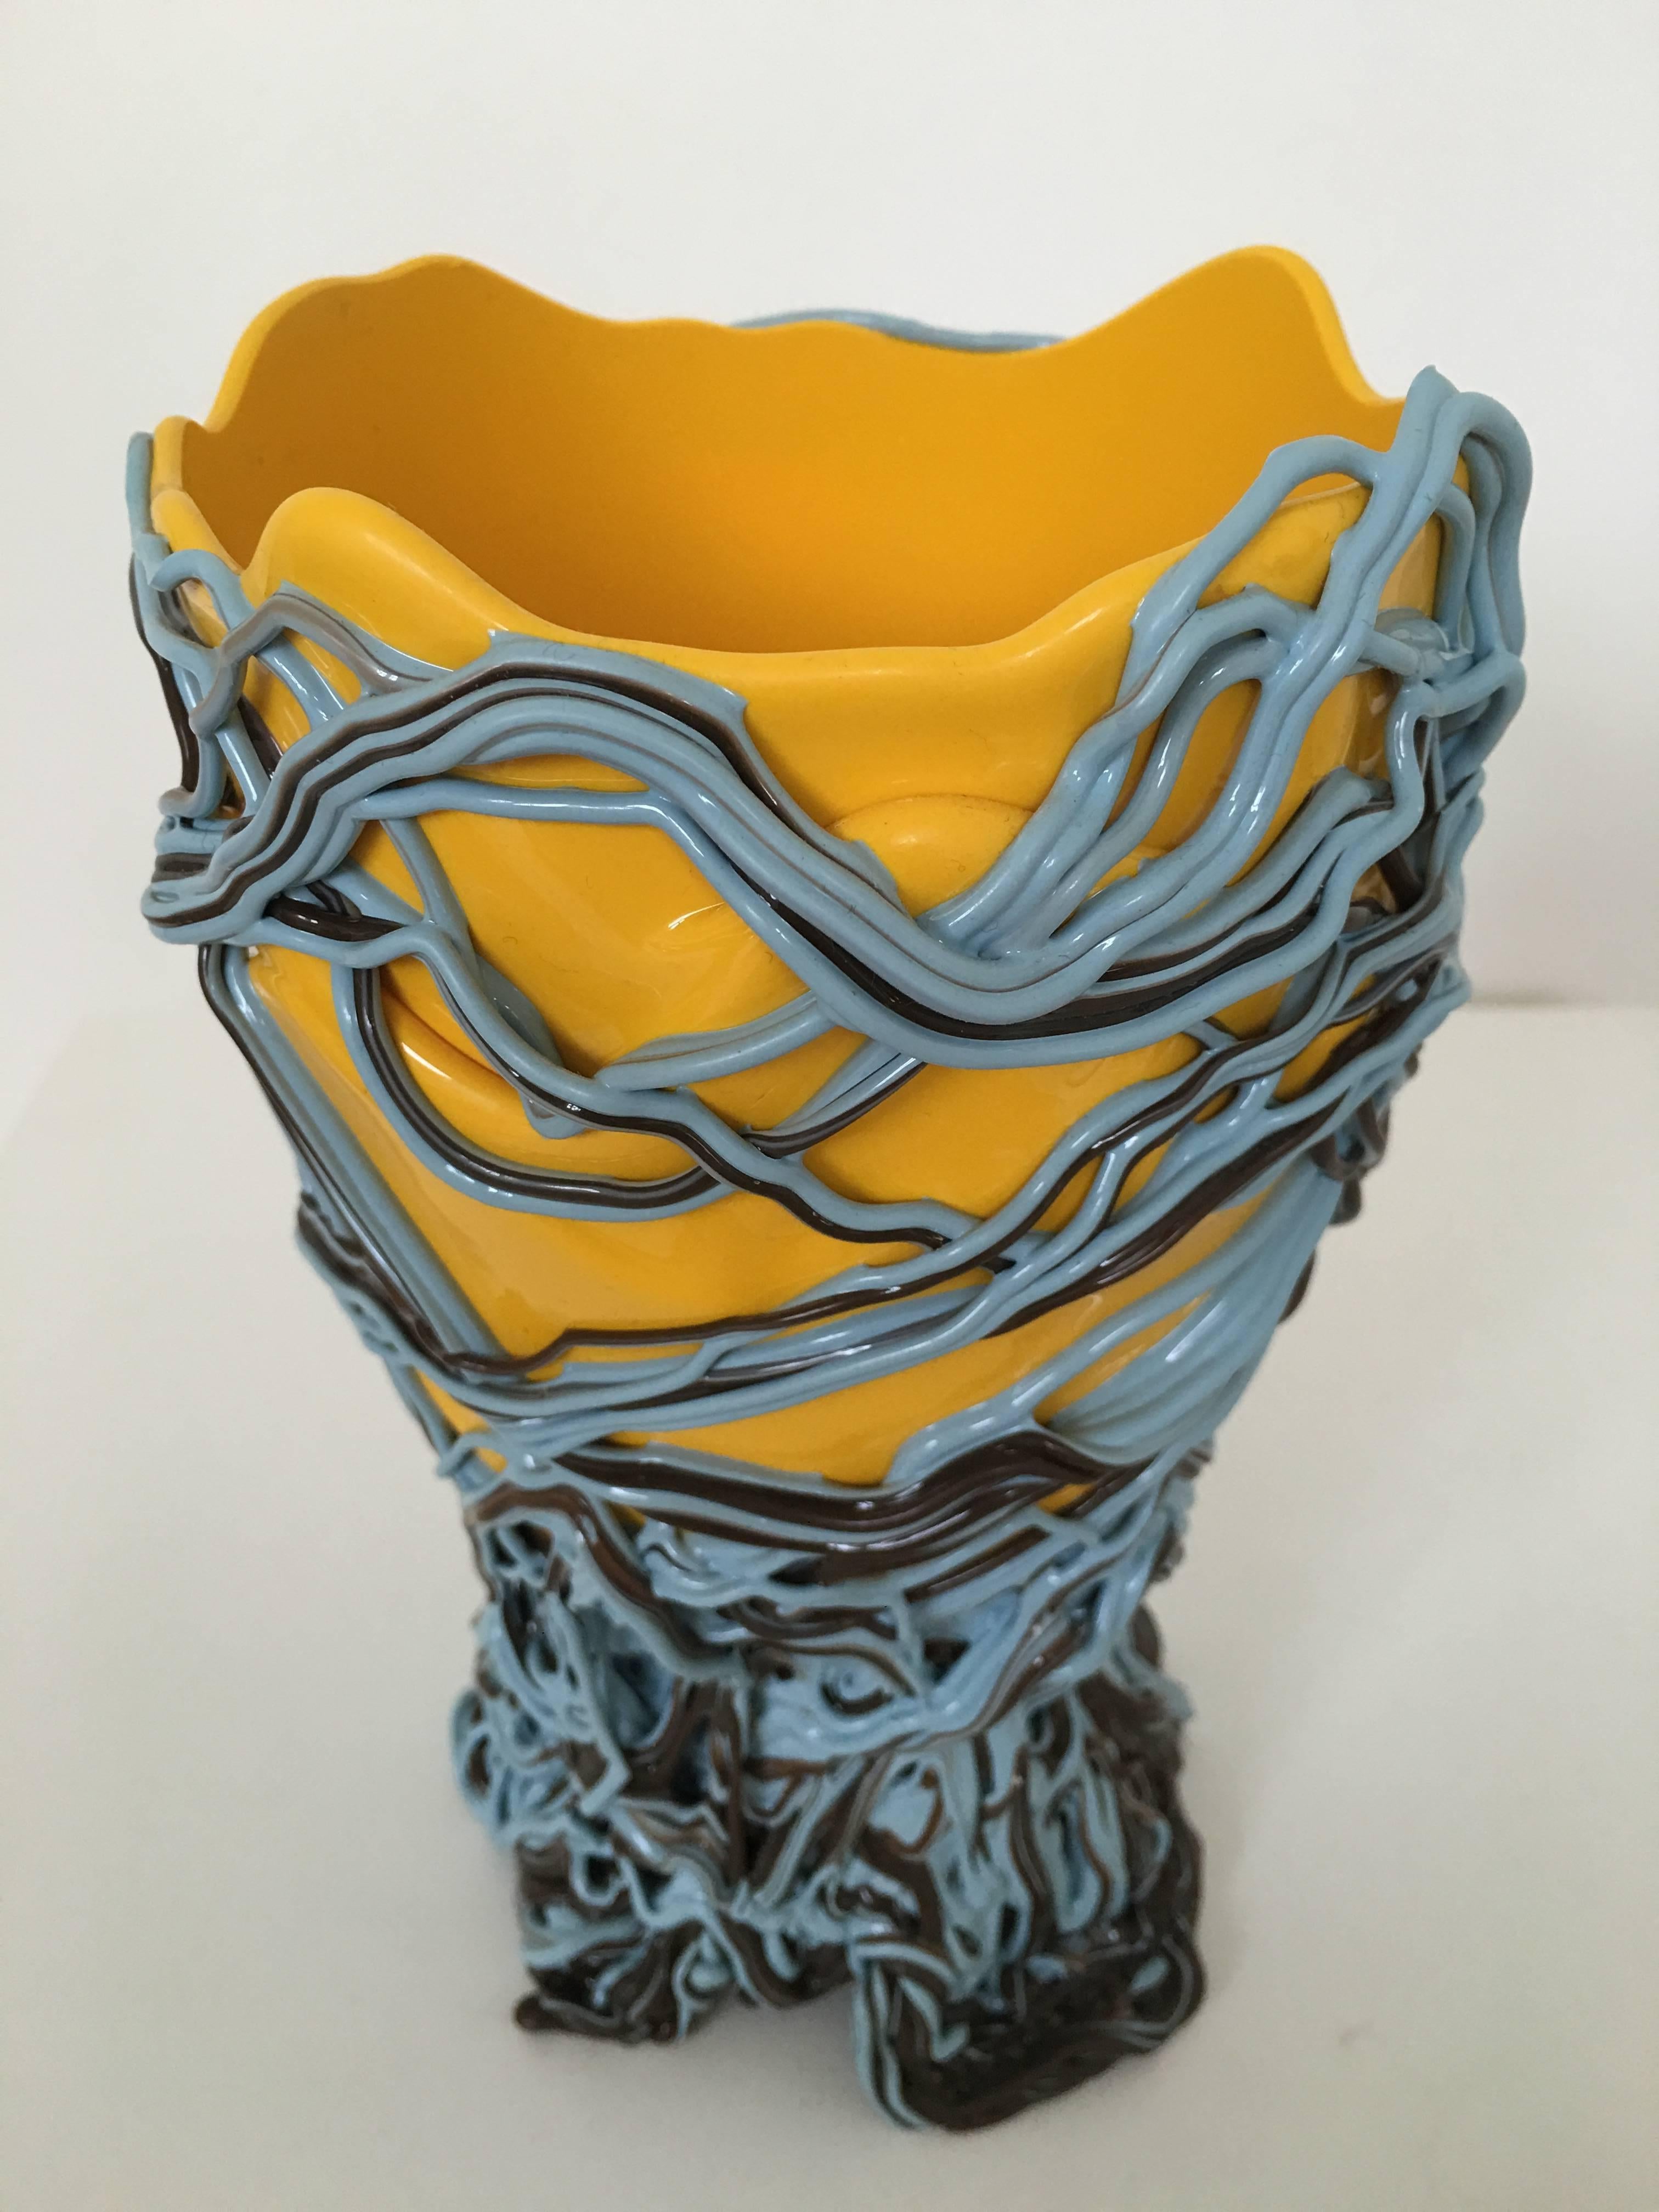 Yellow and Blue Gaetano Pesce Vase In Excellent Condition For Sale In Ashburn, VA